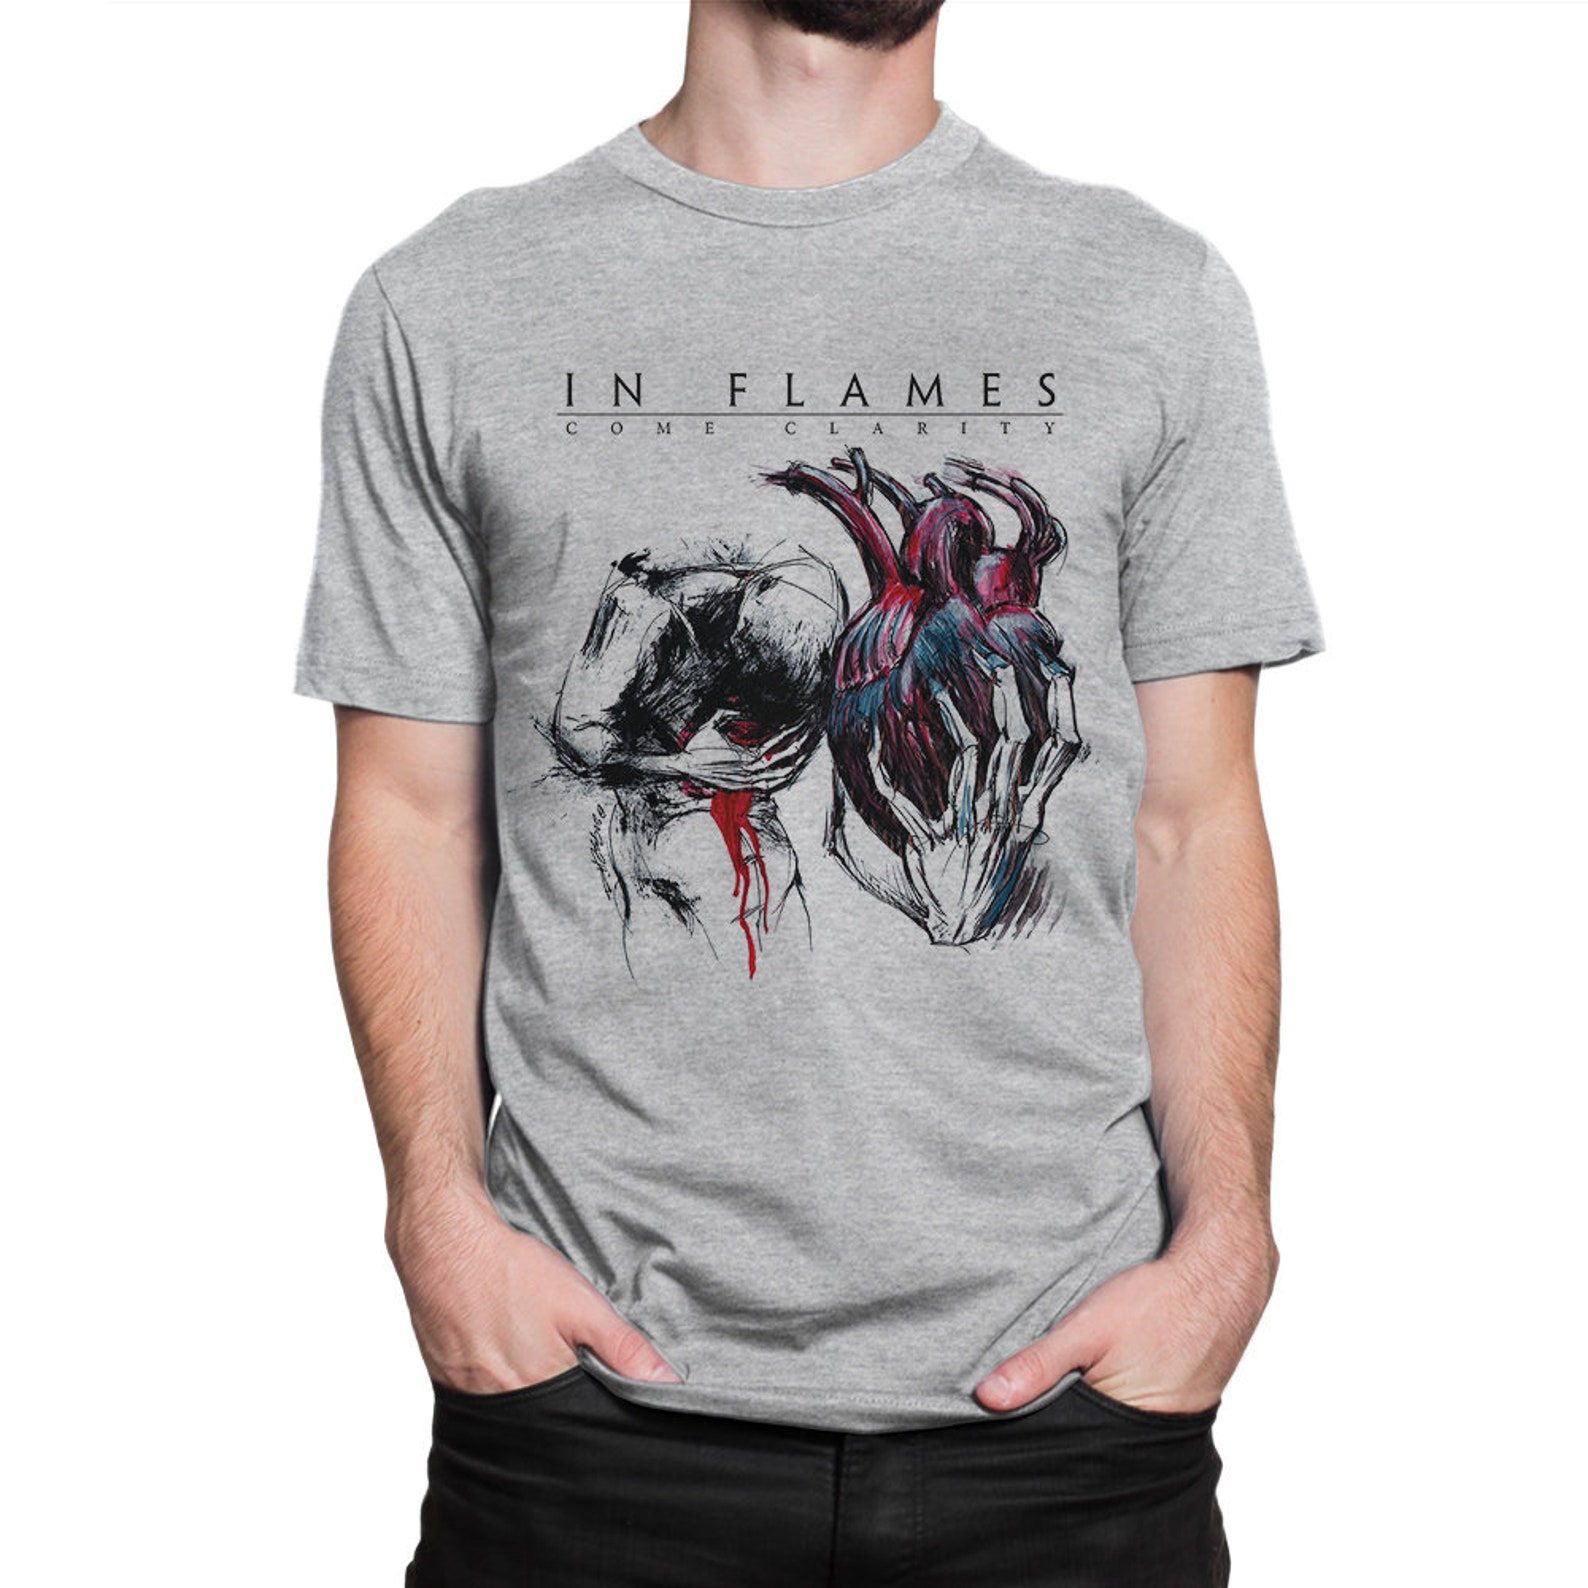 In Flames Come Clarity T-Shirt 100% Cotton Tee Women's | Etsy